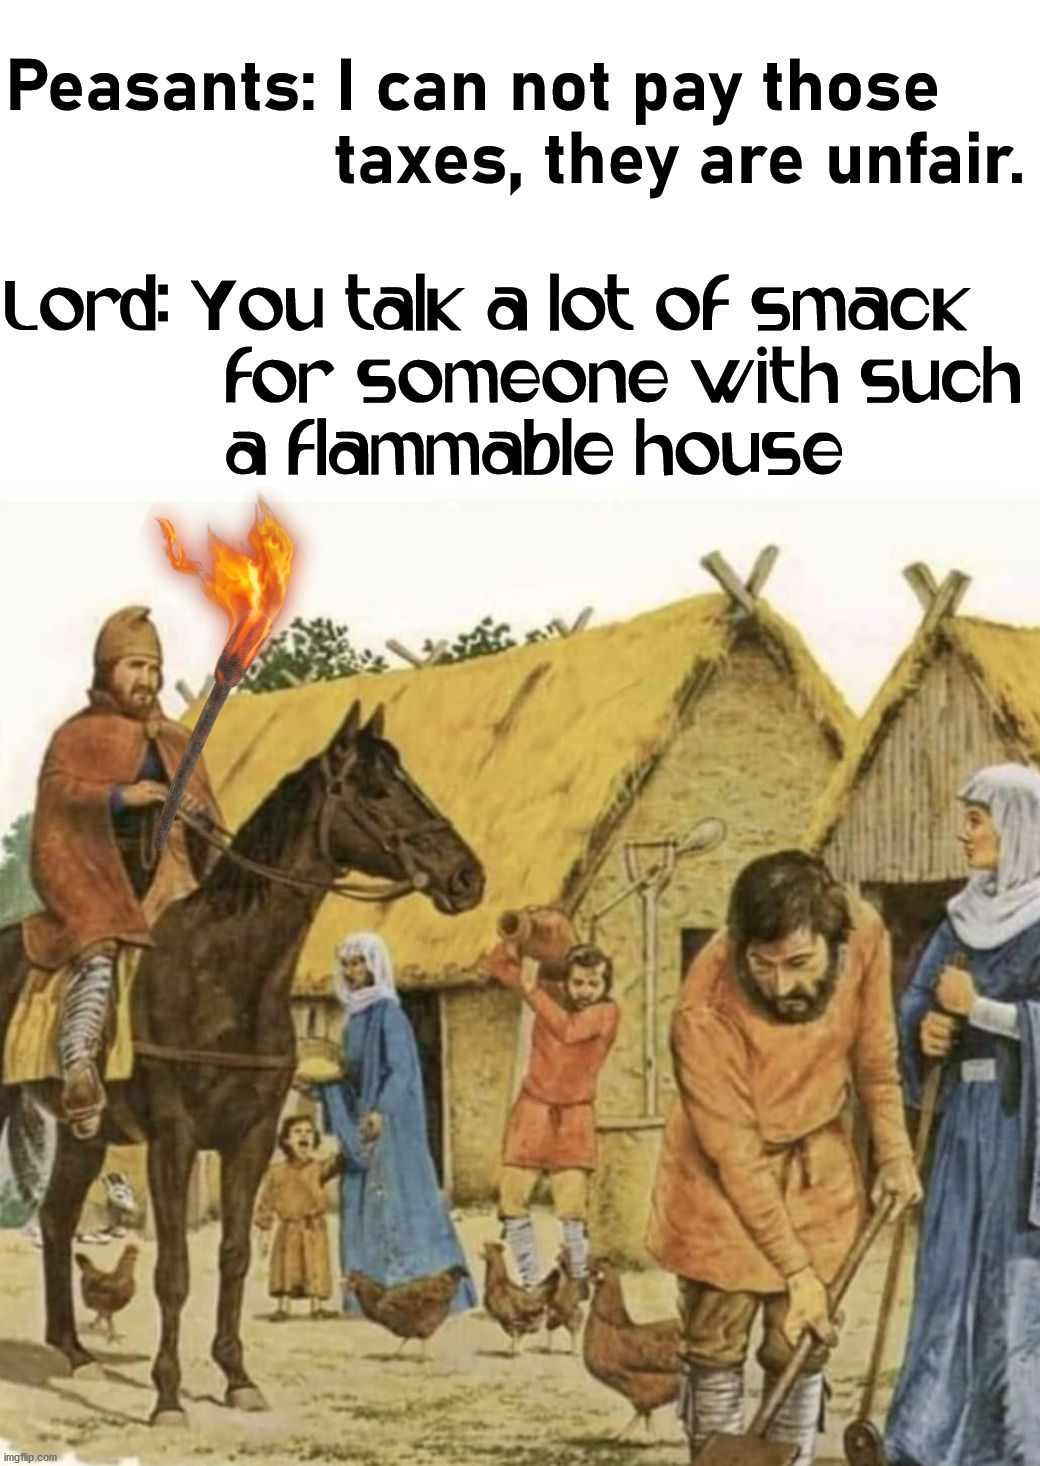 Such a shame | image tagged in peasant,burning,house,evil overlord rules | made w/ Imgflip meme maker